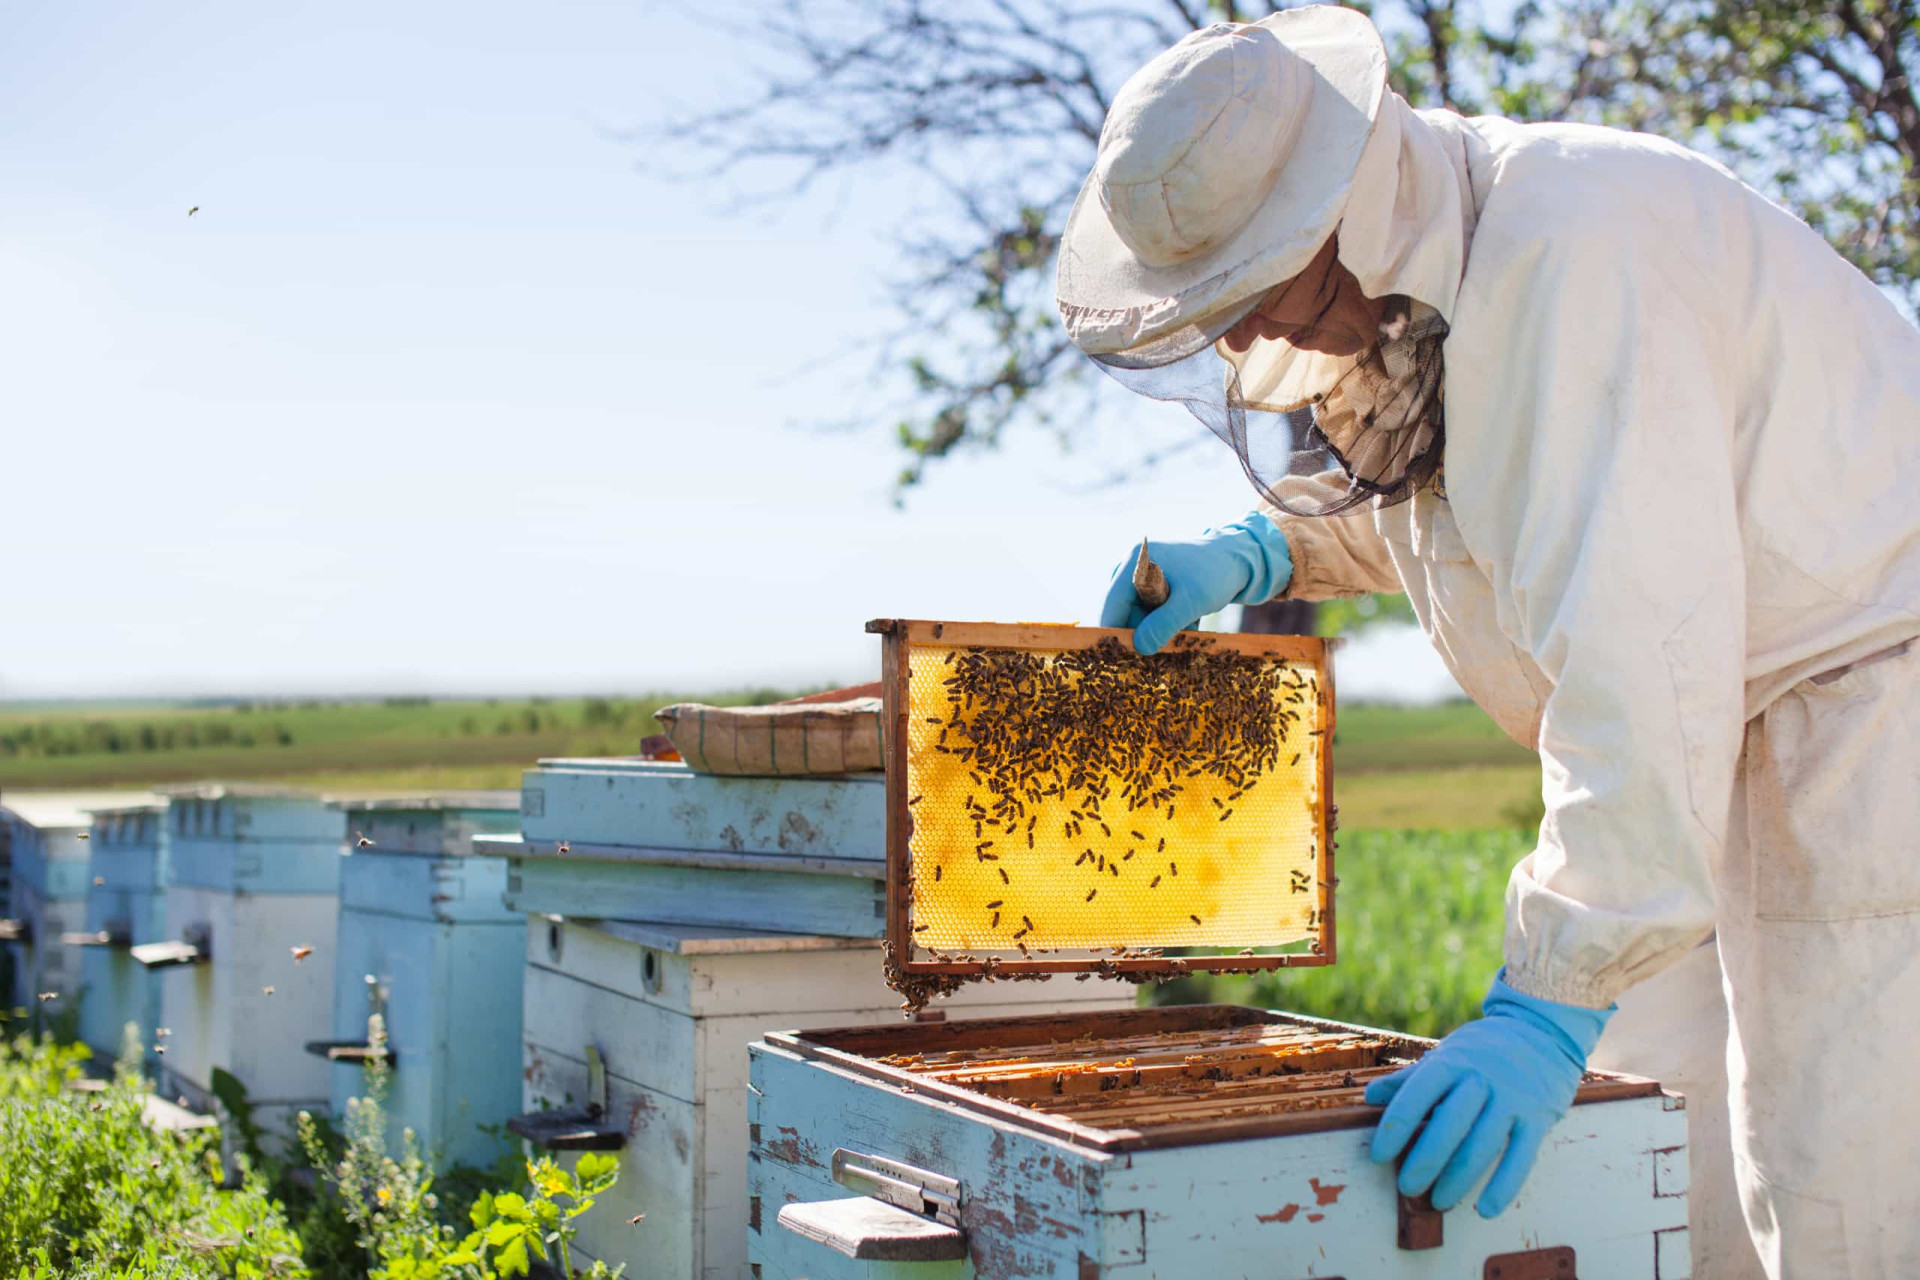 <p>Put simply, a beekeeper is a person who keeps <a href="https://www.starsinsider.com/lifestyle/355666/world-bee-day-fun-easy-ways-to-help-bees-this-summer" rel="noopener">bees</a>. Also known as honey farmers, theirs is a vital job, especially because of the use of honey bees to provide pollination services to fruit and vegetable growers. Busy honey bees also produce commodities such as honey, beeswax, pollen, and royal jelly.</p><p><a href="https://www.msn.com/en-us/community/channel/vid-7xx8mnucu55yw63we9va2gwr7uihbxwc68fxqp25x6tg4ftibpra?cvid=94631541bc0f4f89bfd59158d696ad7e">Follow us and access great exclusive content every day</a></p>